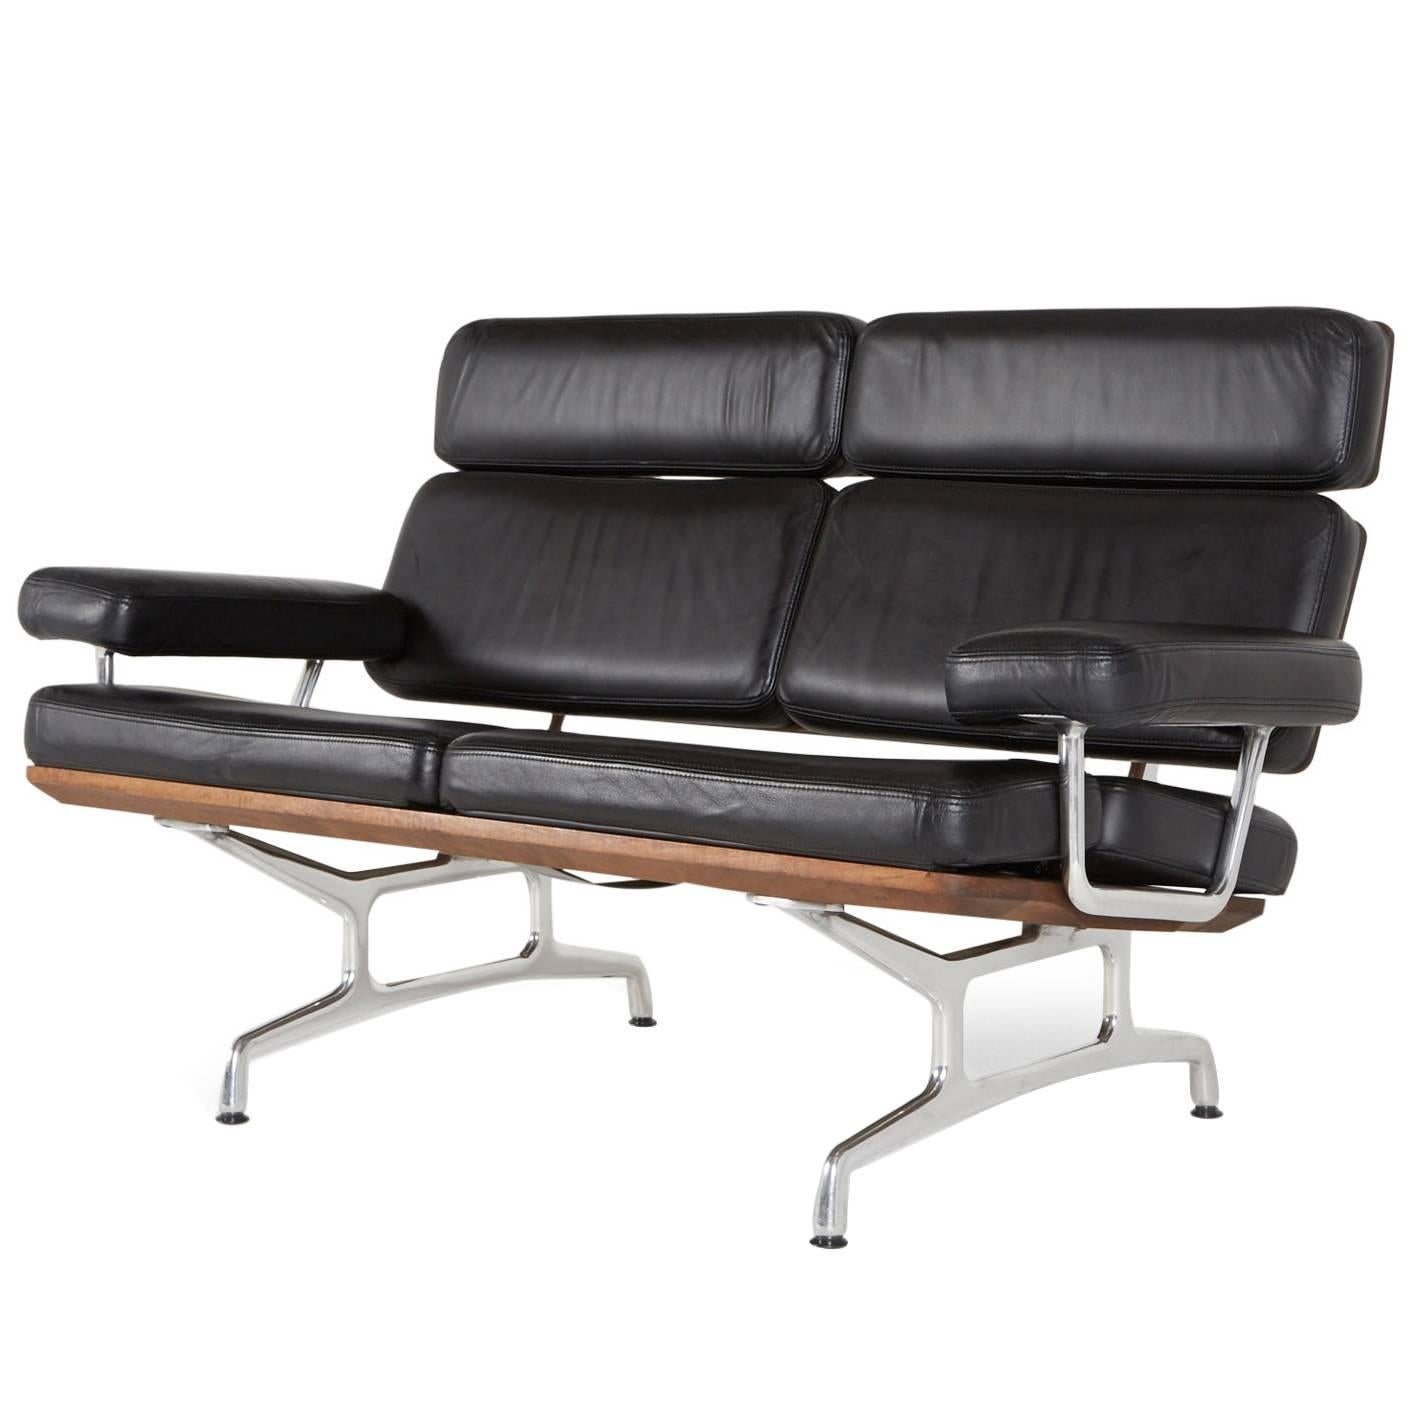 Eames Sofa by Charles and Ray Eames for Herman Miller